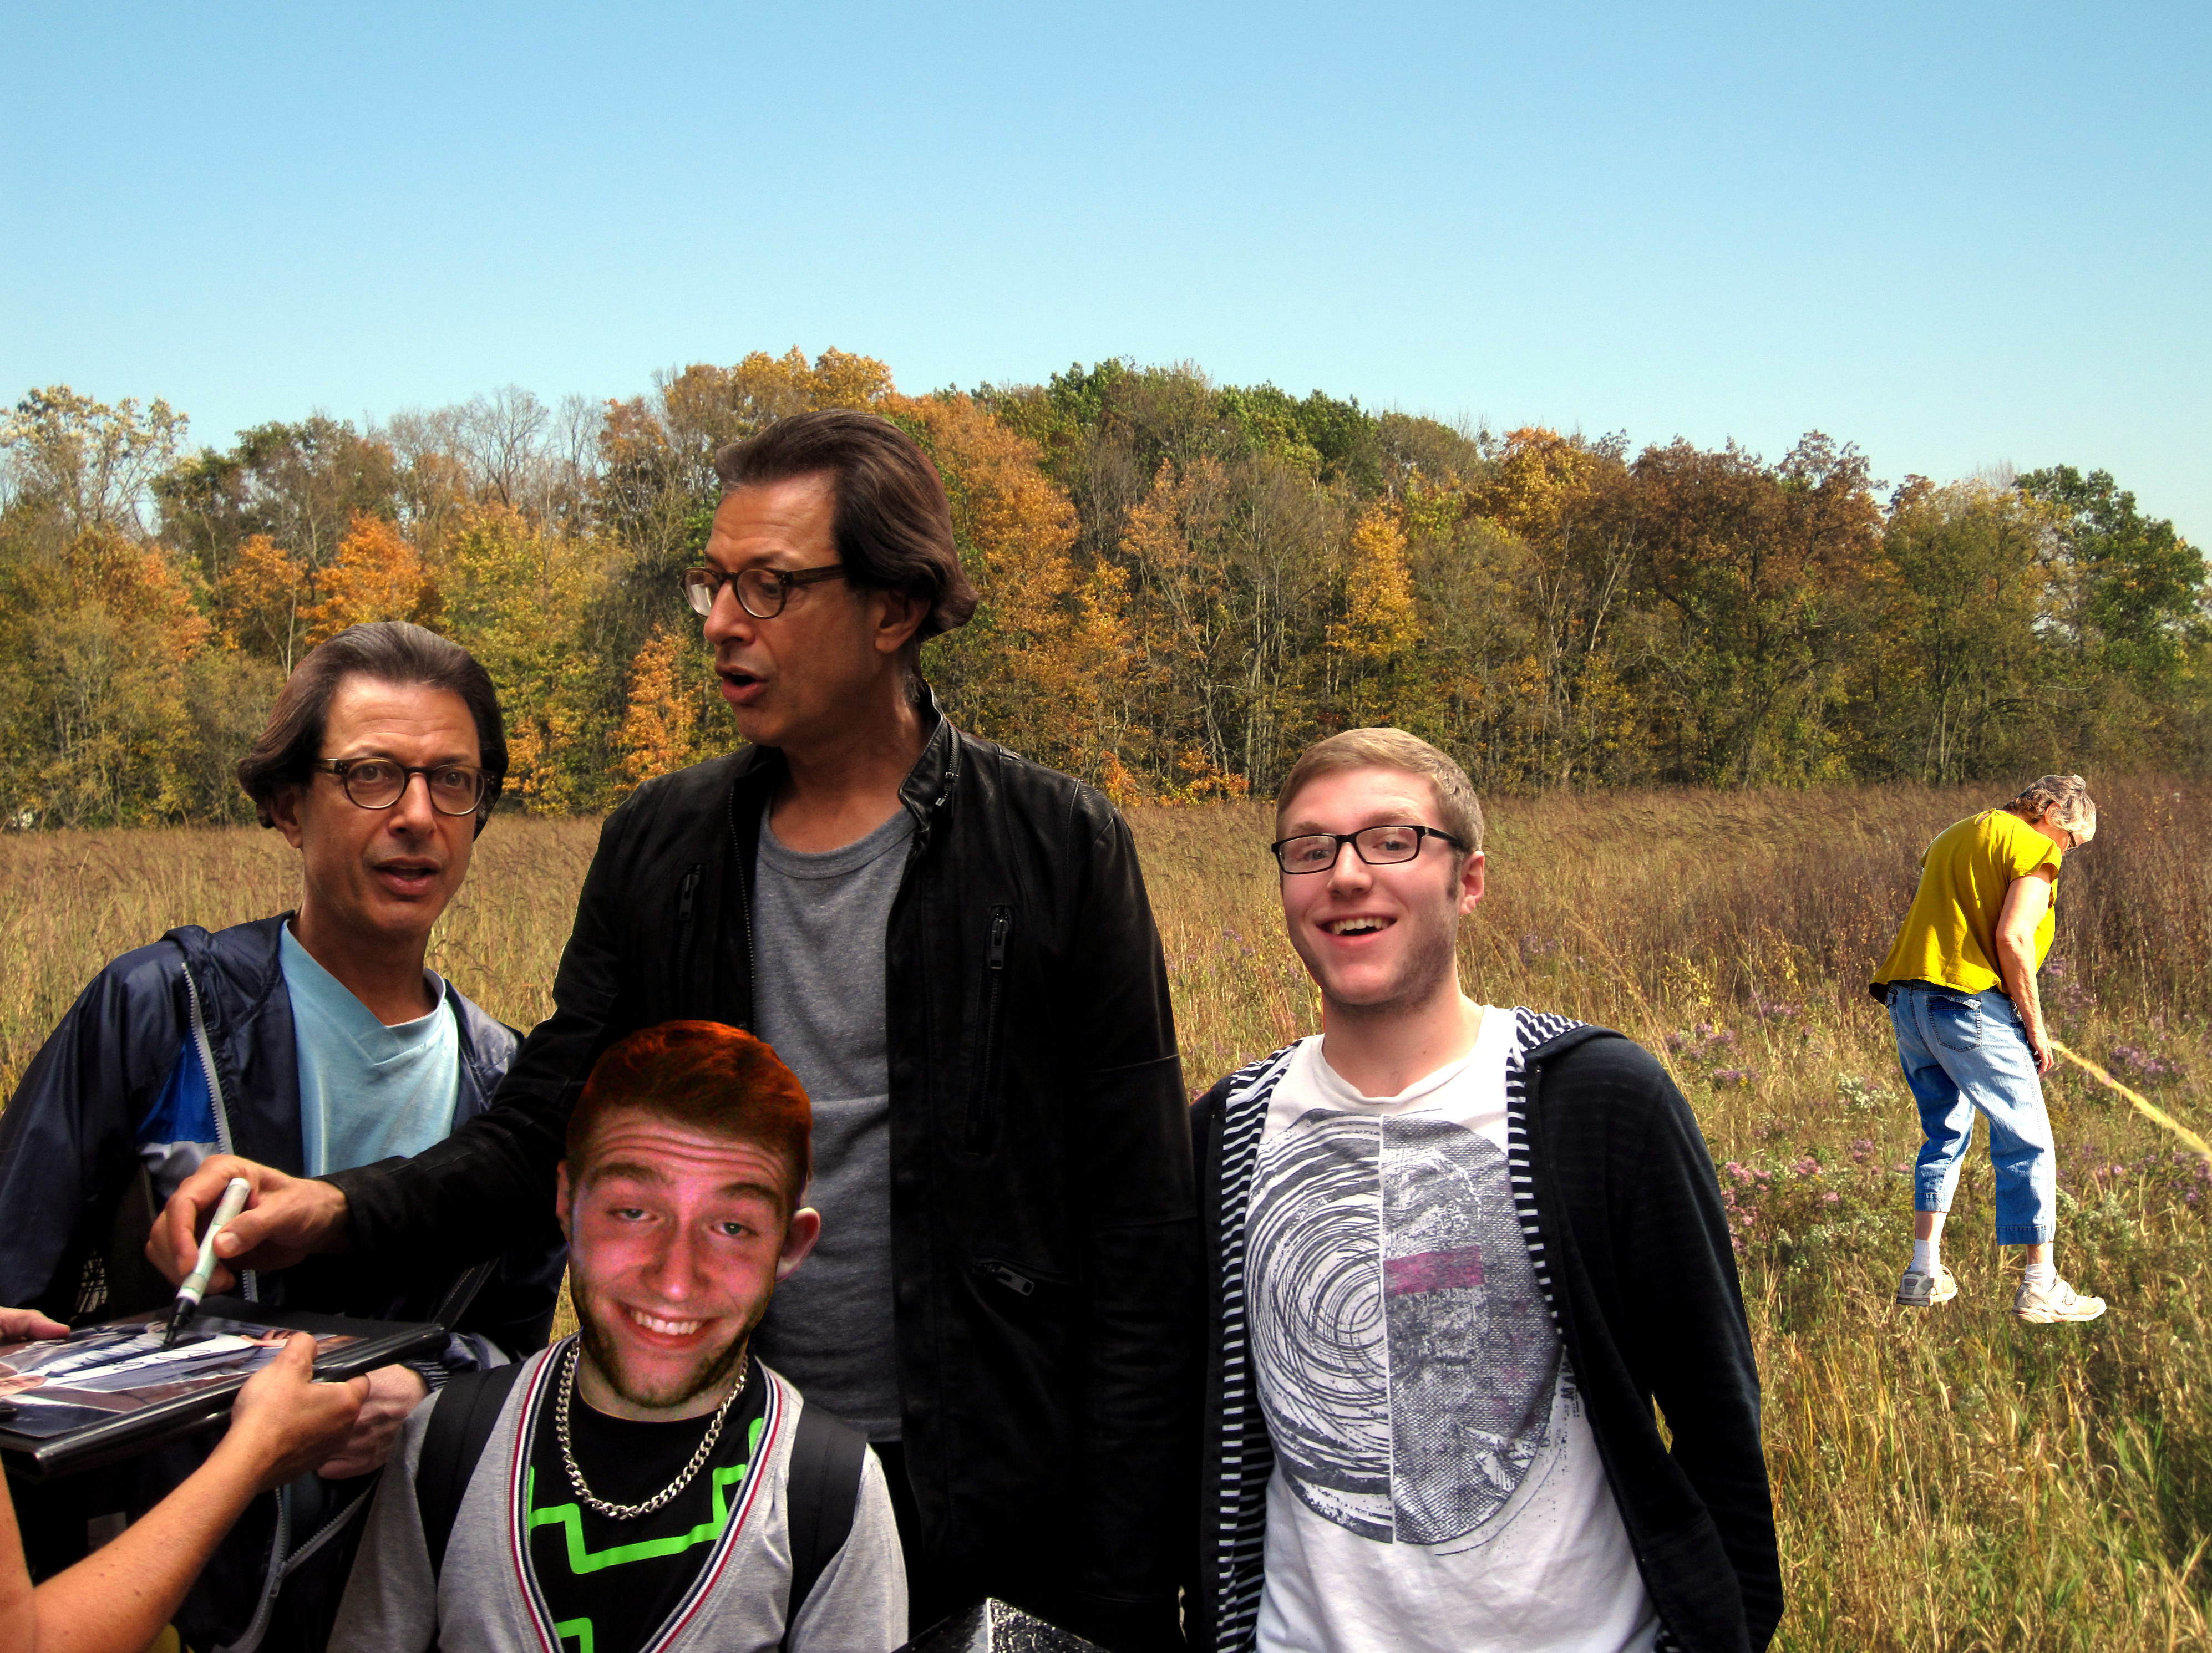 Photo of my cousin at a Jeff Goldblum signing in a field with my grandma peeing in the background.